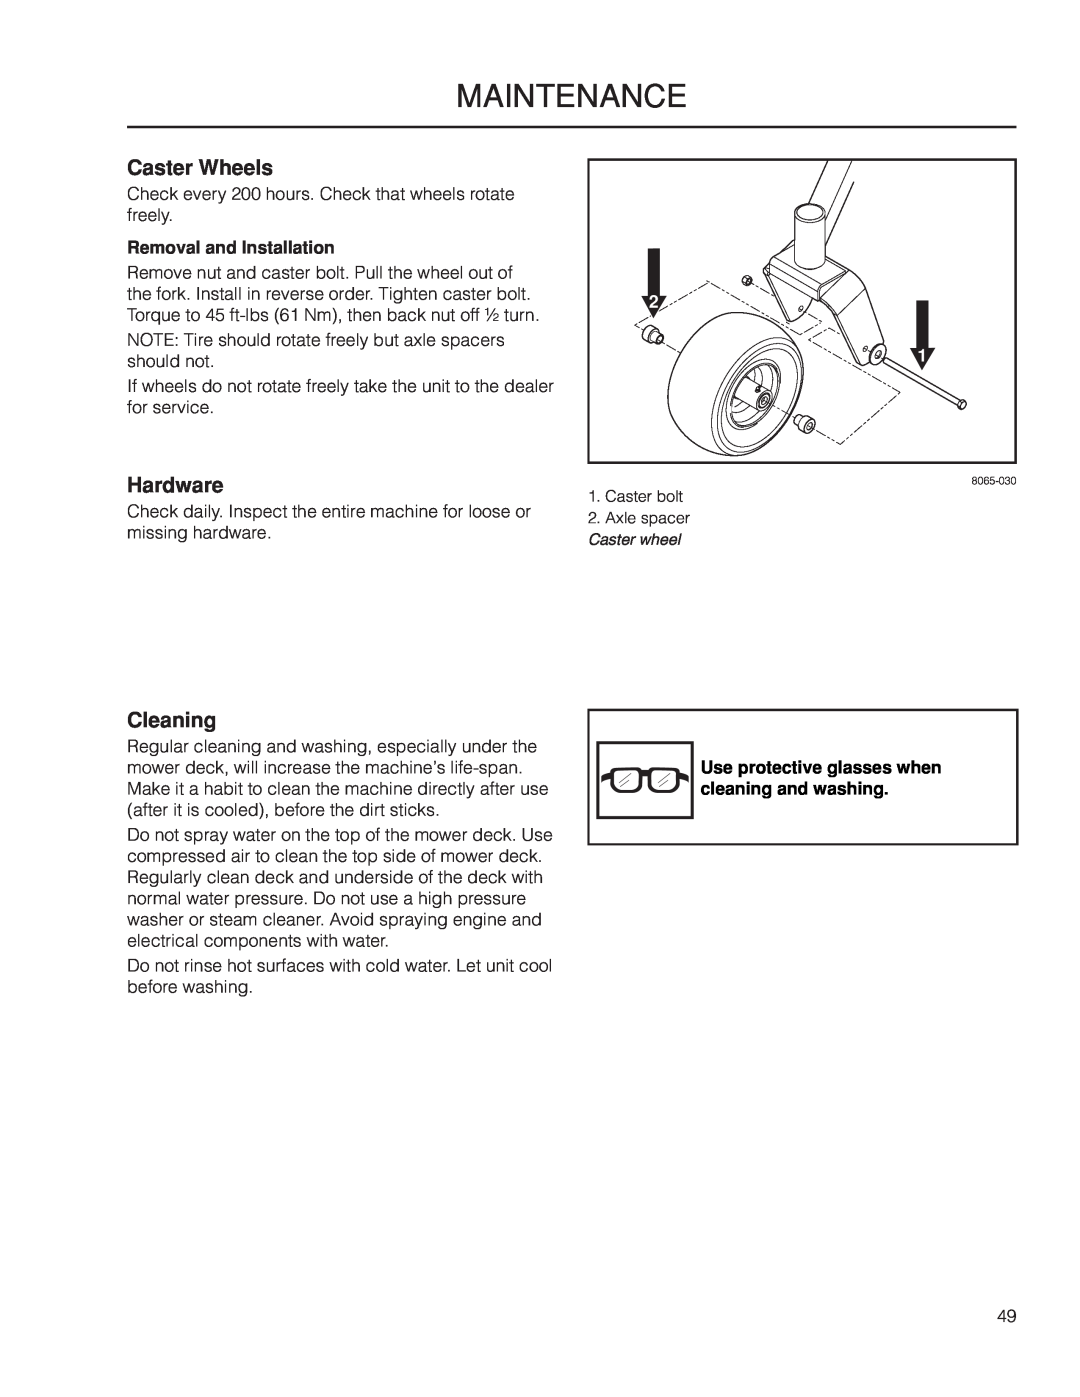 Yazoo/Kees ZPKW5426 manual Caster Wheels, Hardware, Cleaning, Removal and Installation, maintenance 